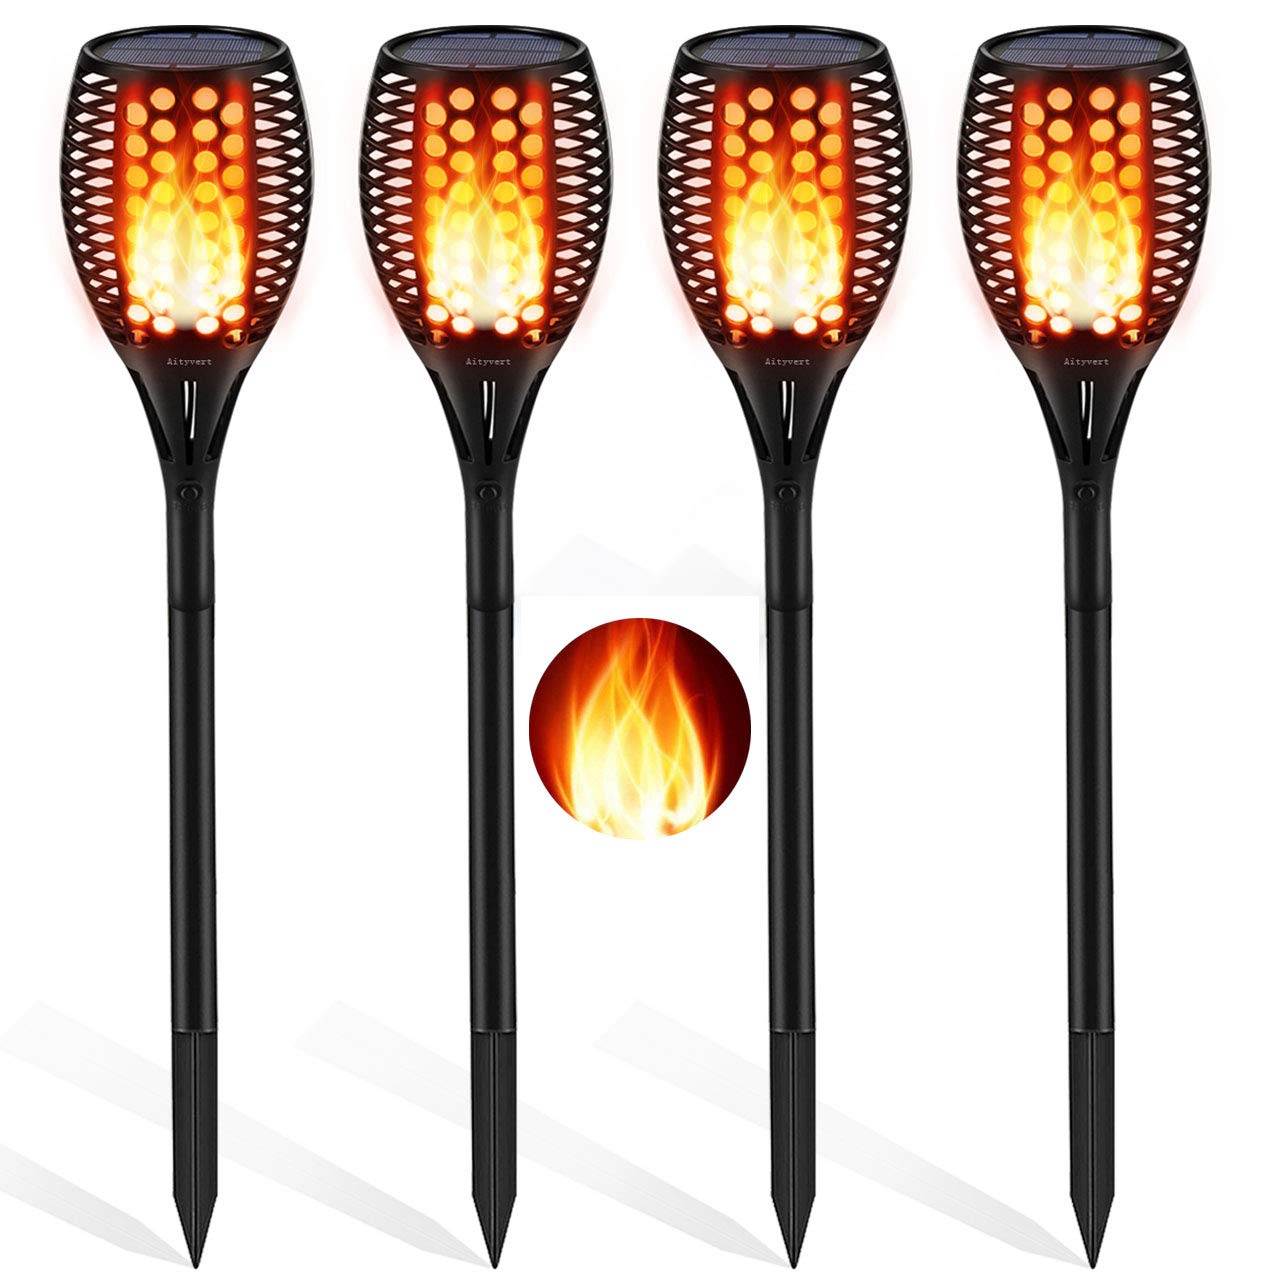 Aityvert Solar Torch Lights Upgraded, Waterproof Flickering Flame Solar Torches Dancing Flames Landscape Decoration Lighting Dusk to Dawn Outdoor Security Solar Light for Garden Patio Driveway 4 Packs